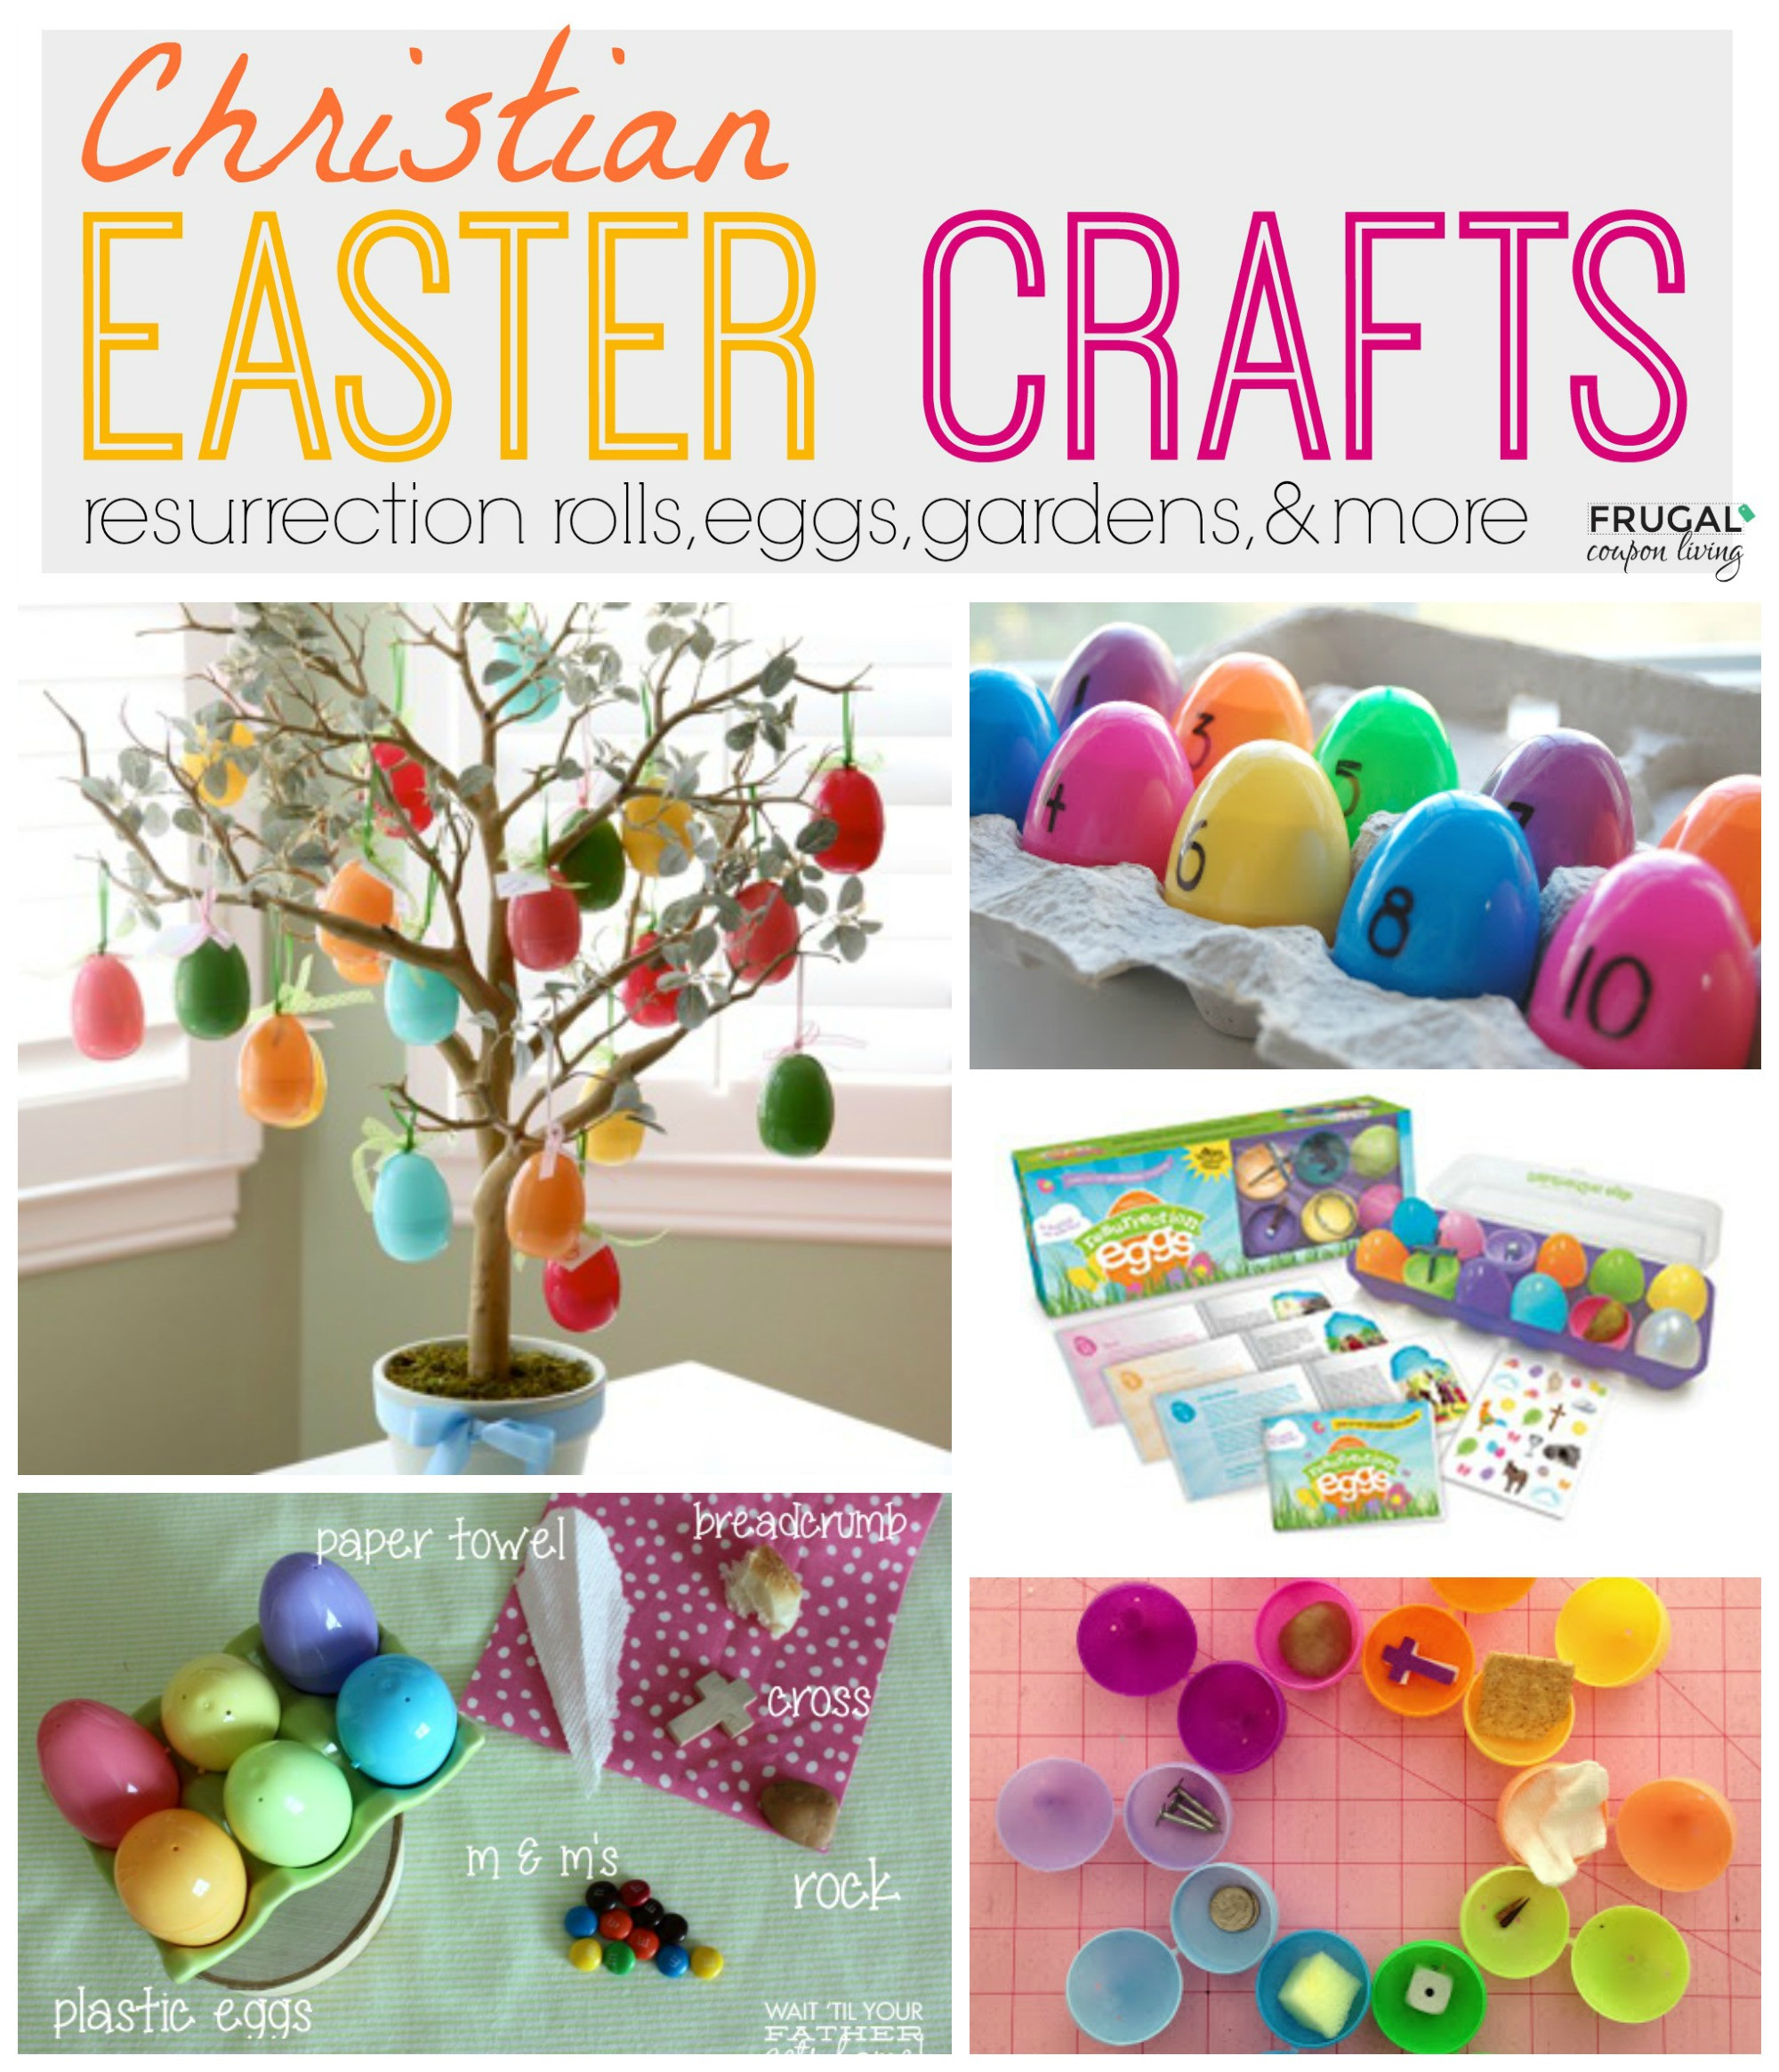 Easter Crafts For Children's Church
 Christian Easter Crafts Resurrection Eggs Gardens and Rolls